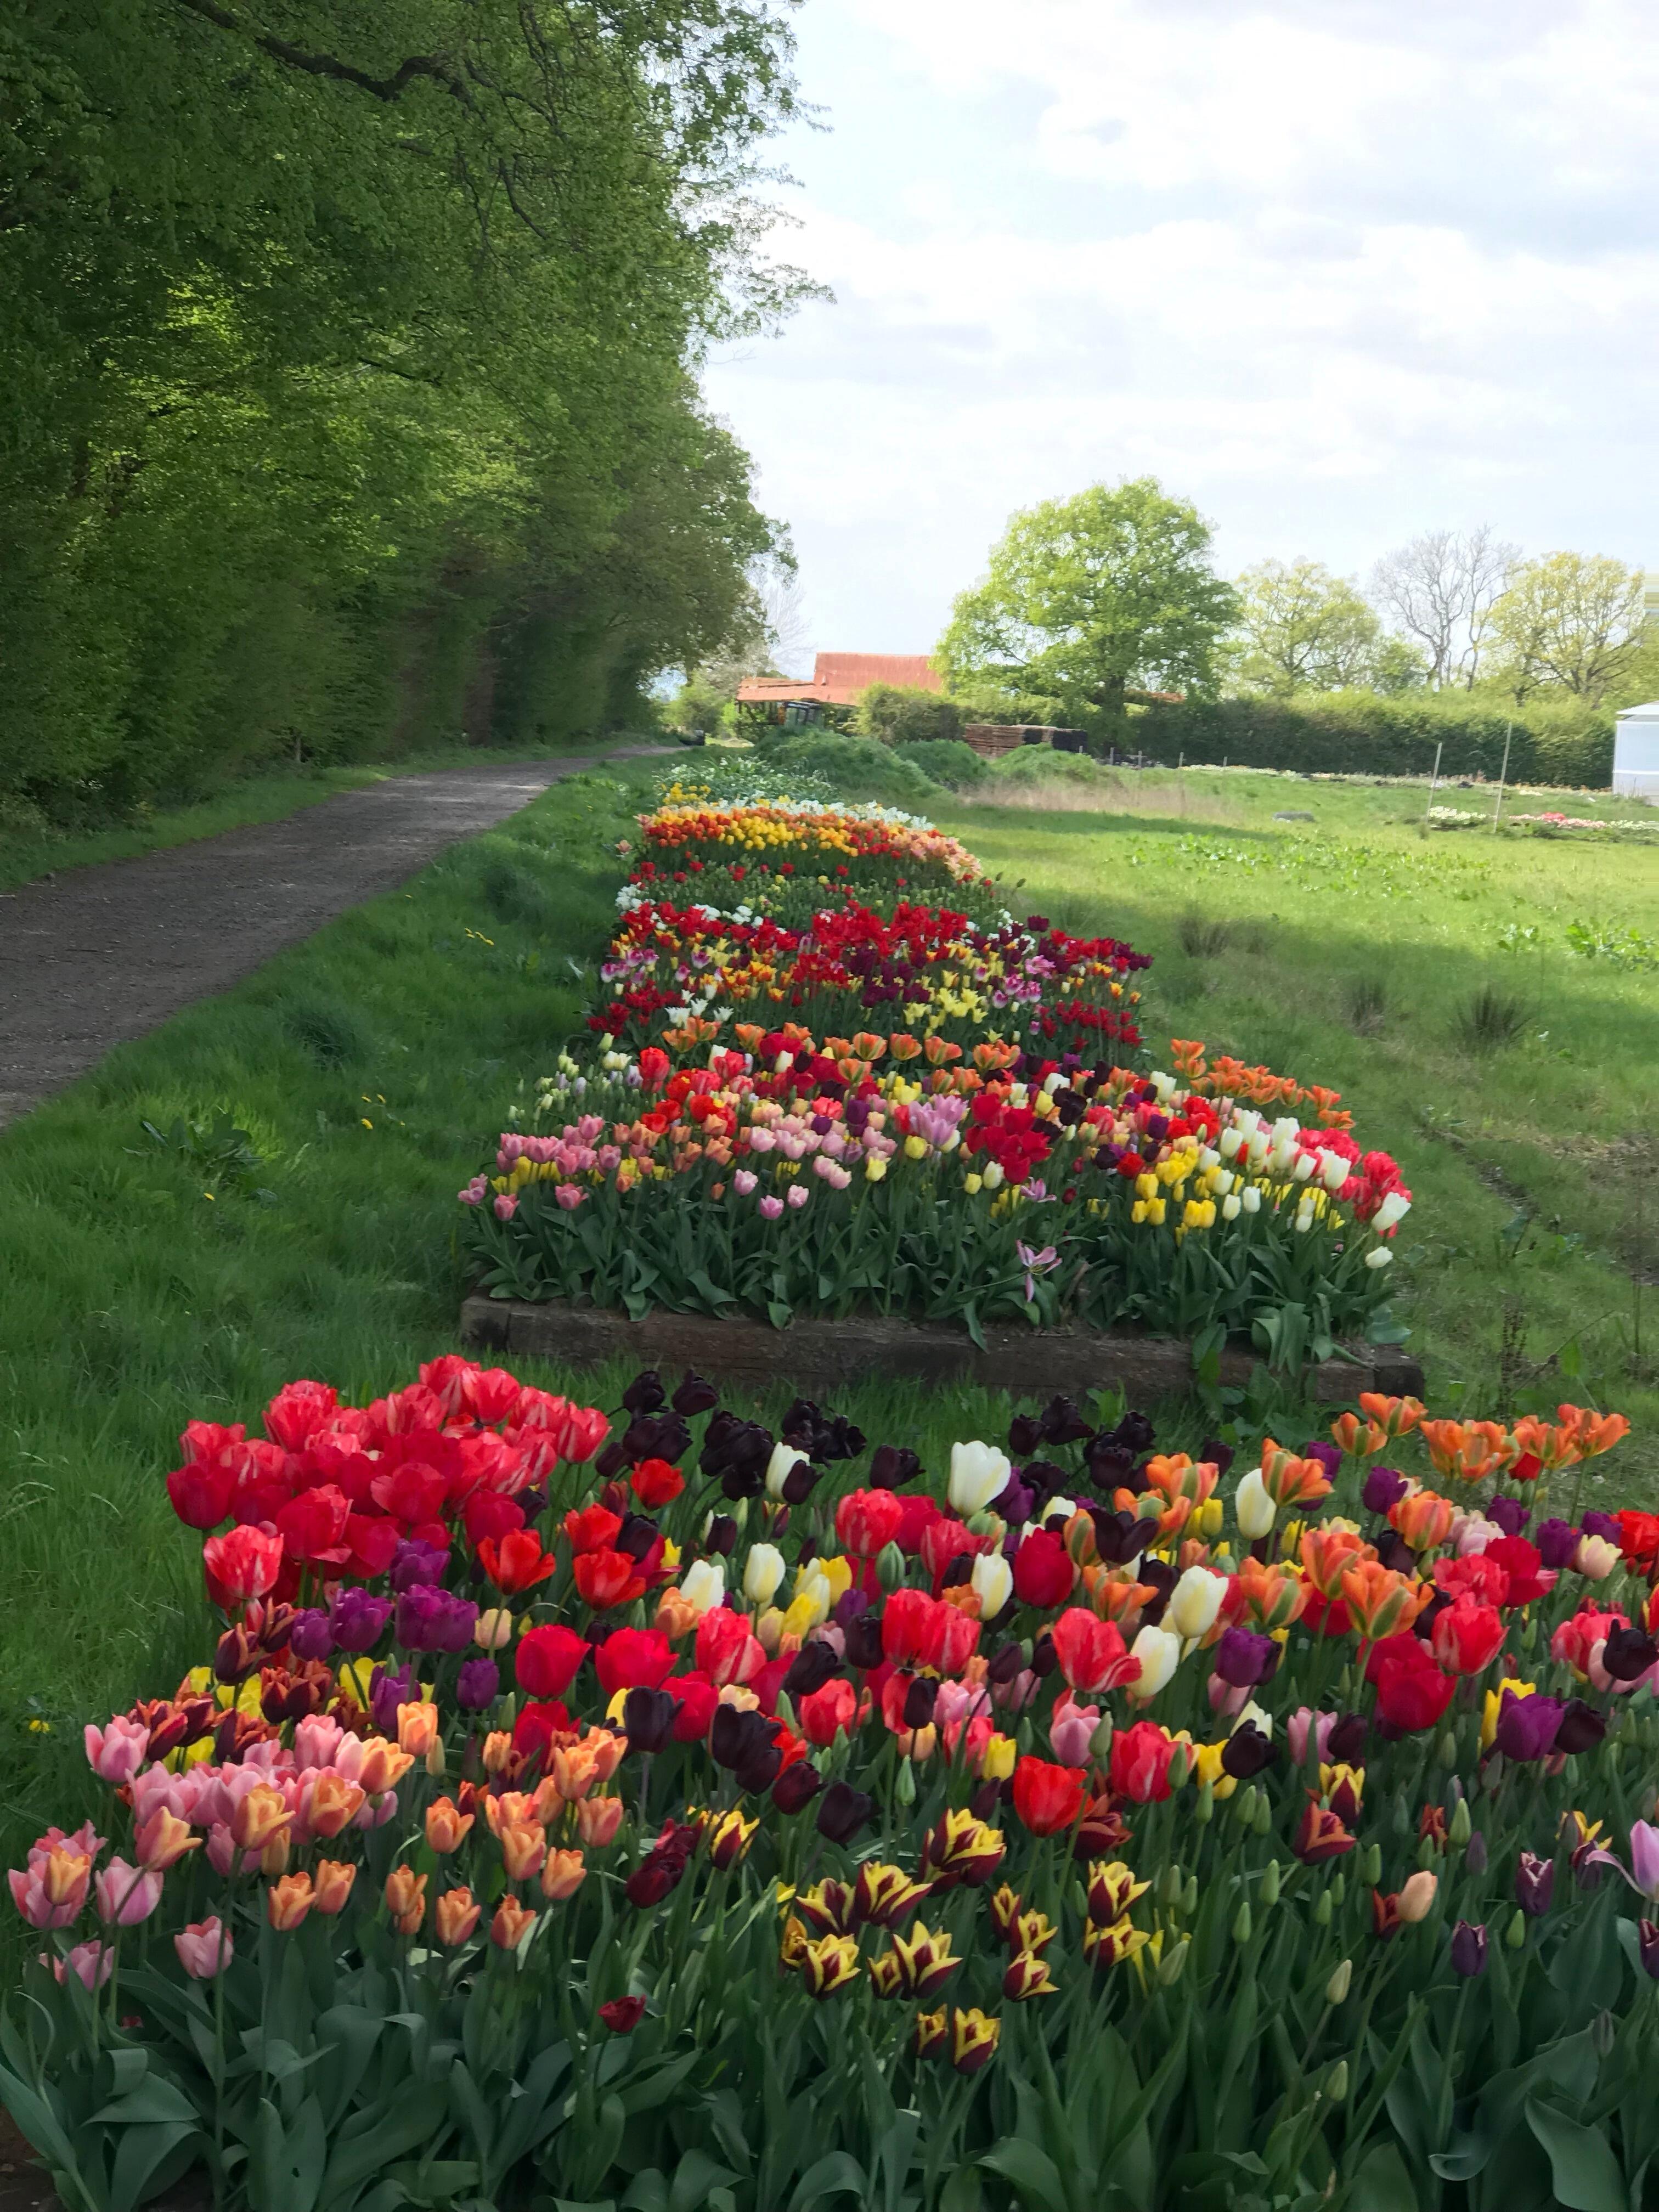 Display beds of tulips in 2022